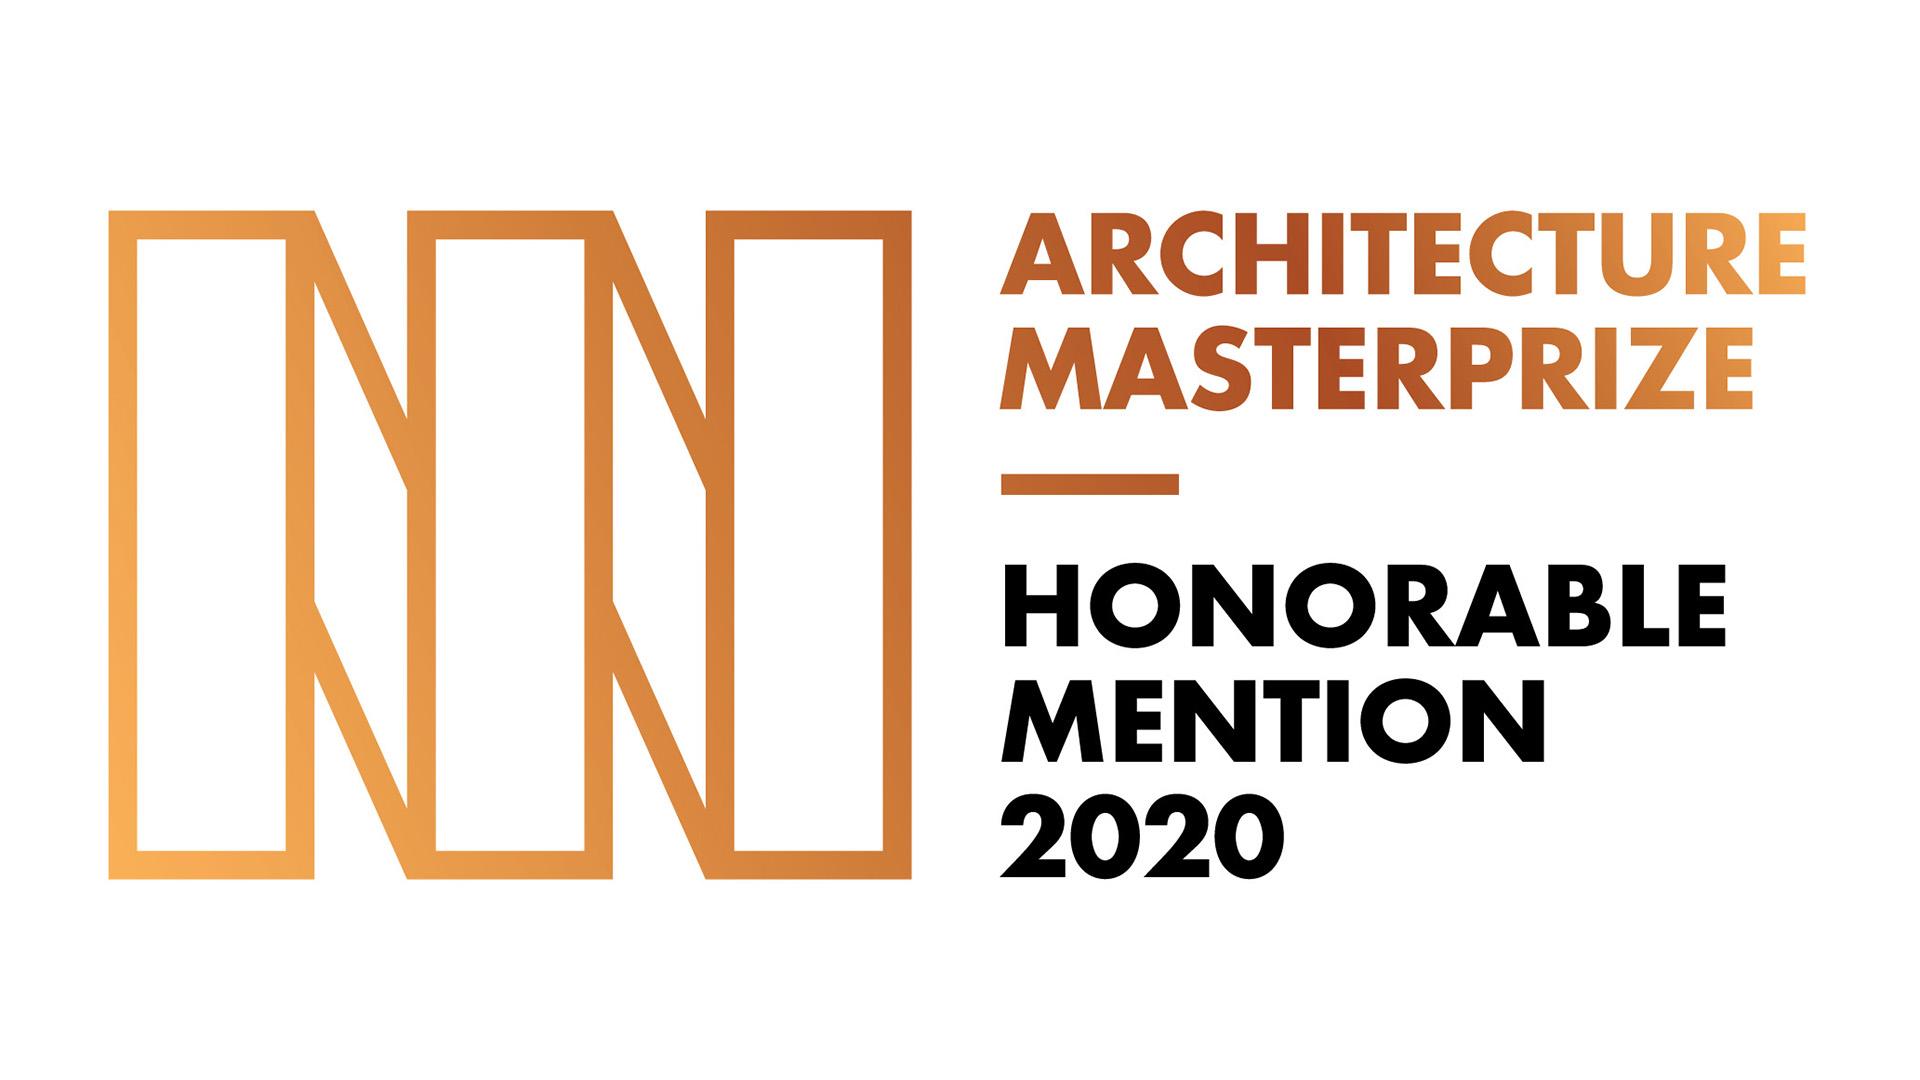 Architecture Masterprize 2020 - Honorable Mention 2